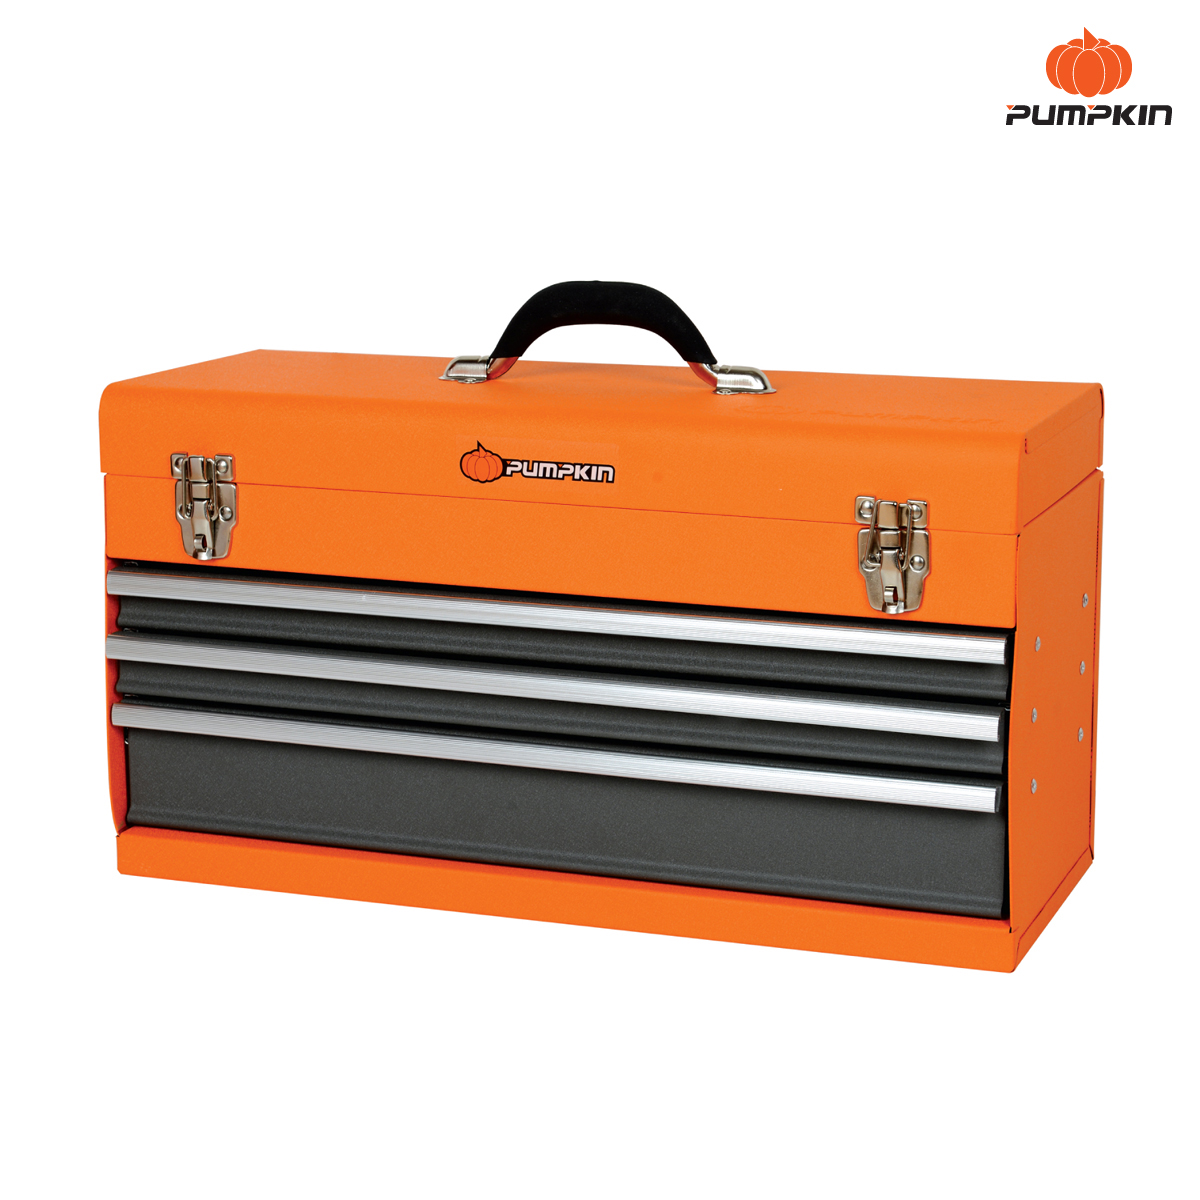 Pumpkin Tool Box with 3 Drawers, Top Cover 21 “TB21C, 20737